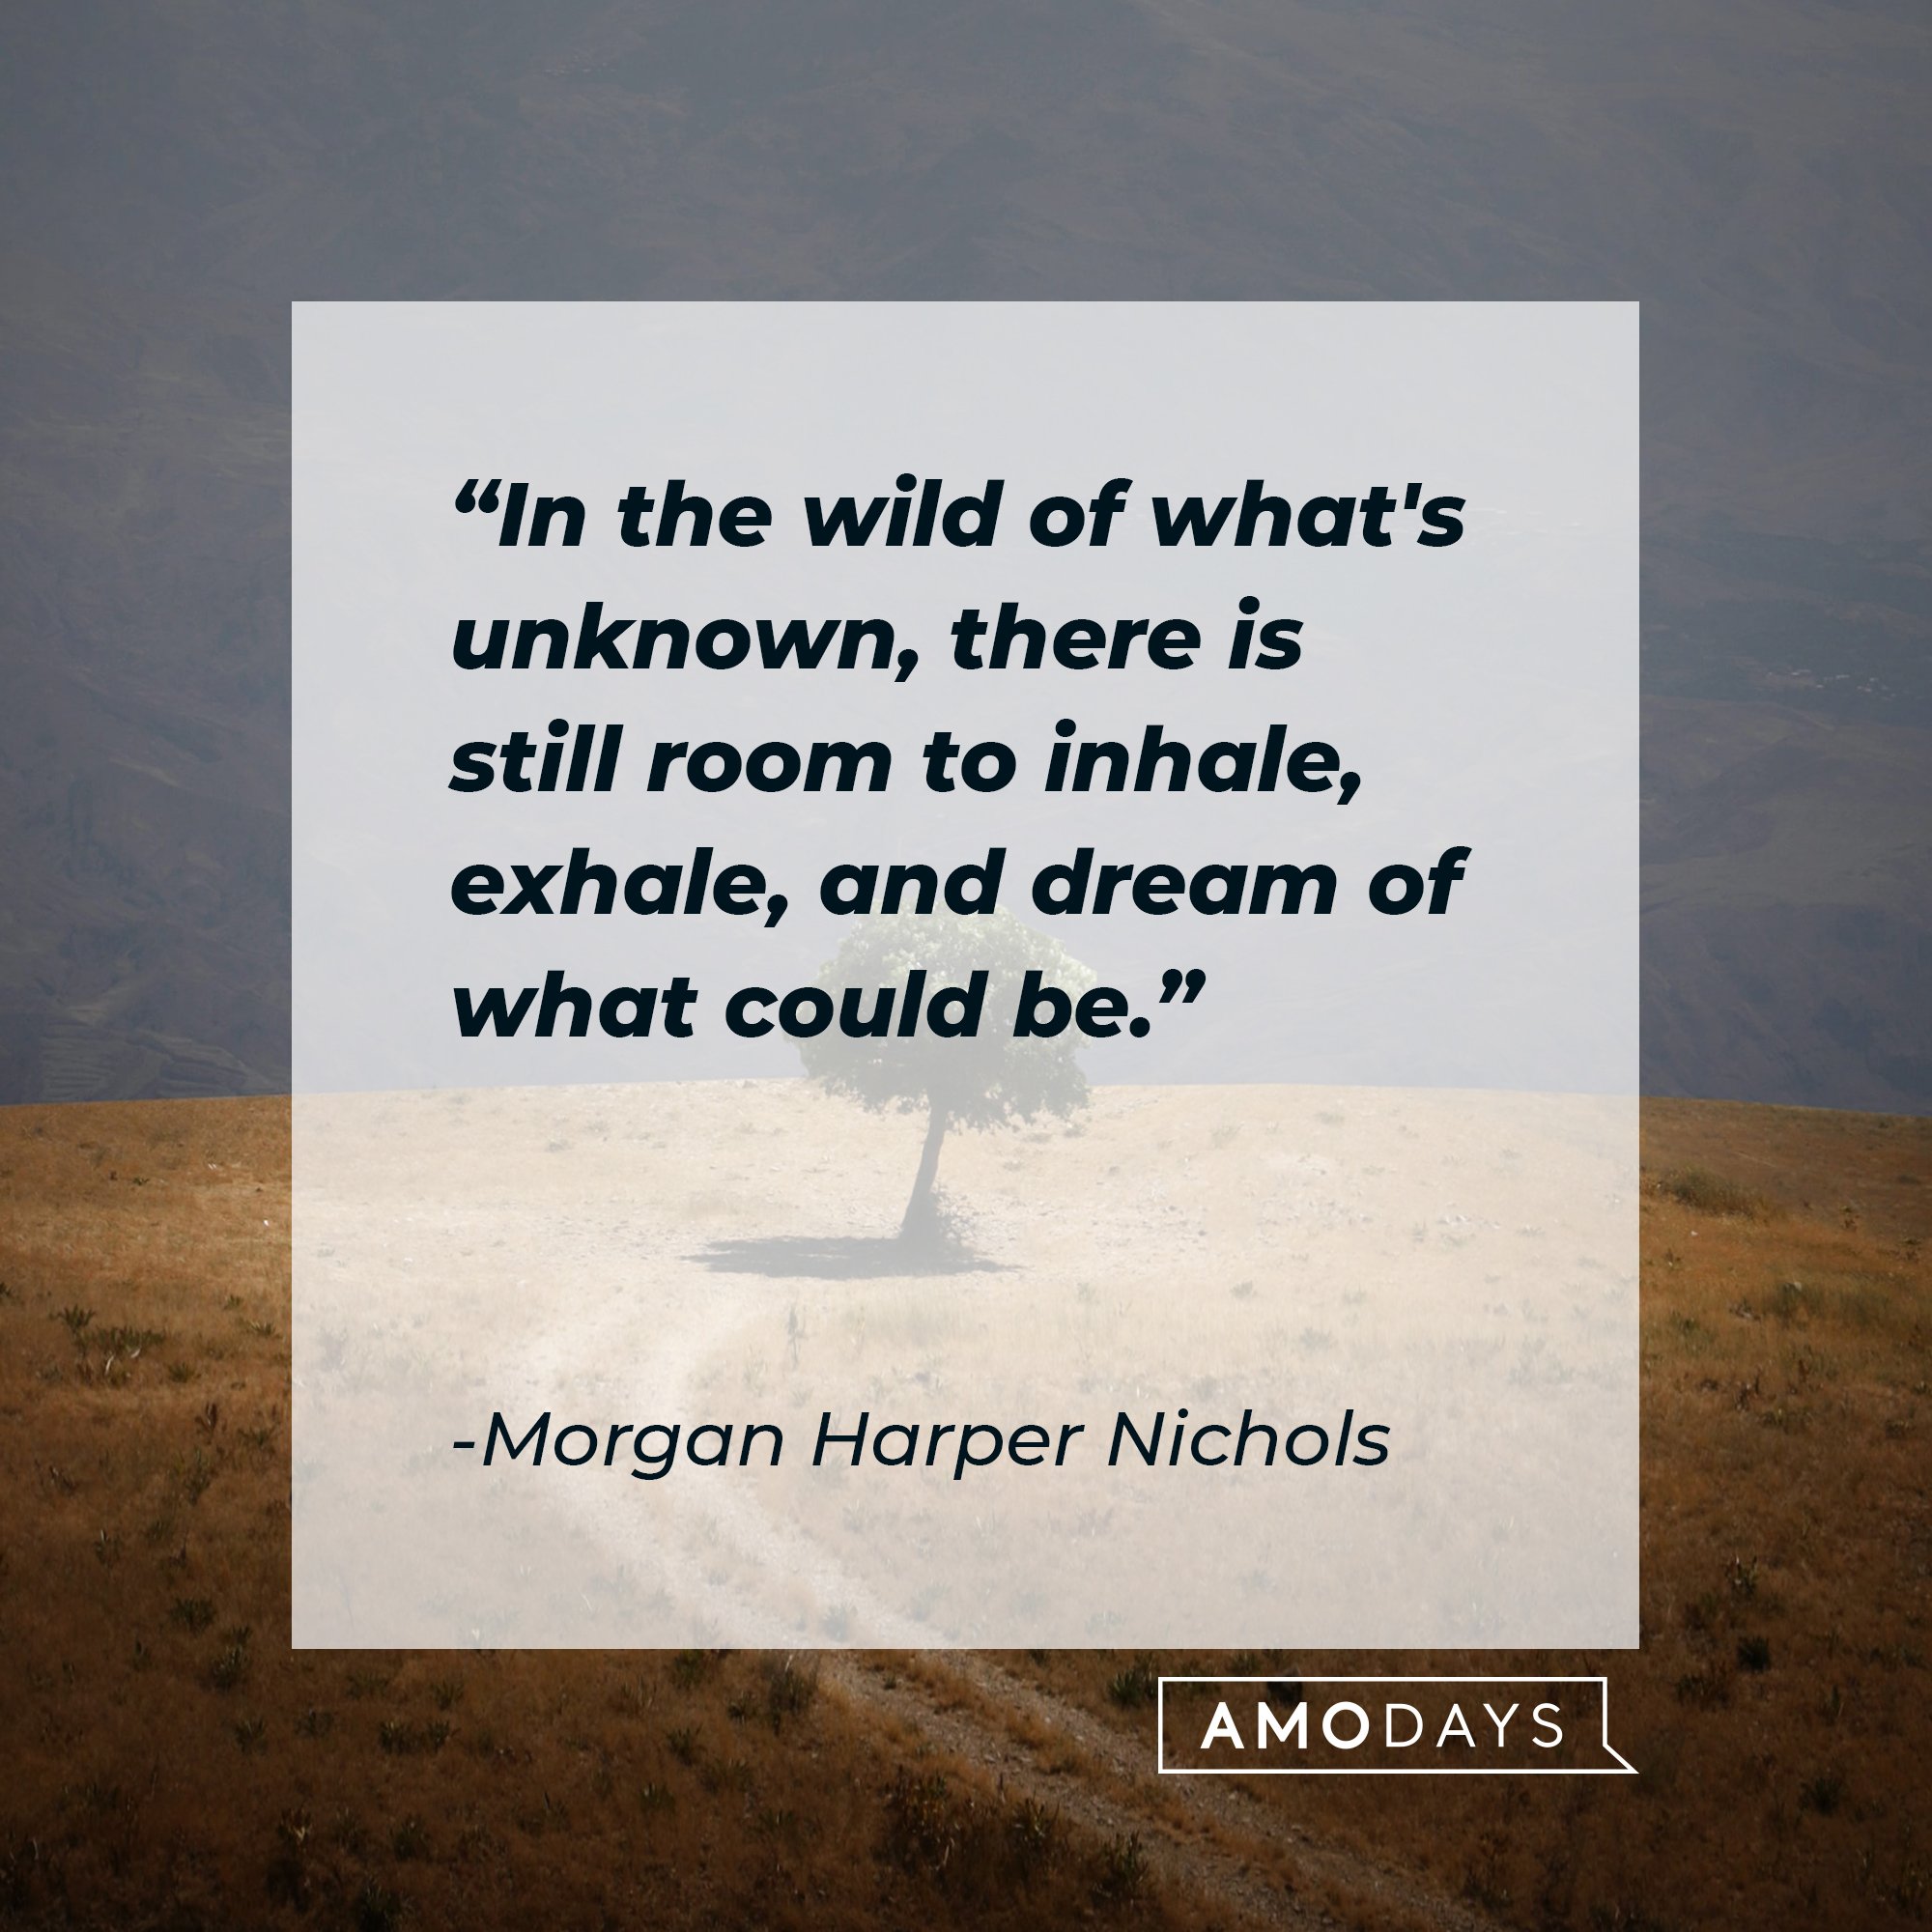 Morgan Harper Nichols’ quote: "In the wild of what's unknown, there is still room to inhale, exhale, and dream of what could be." | Image: AmoDays